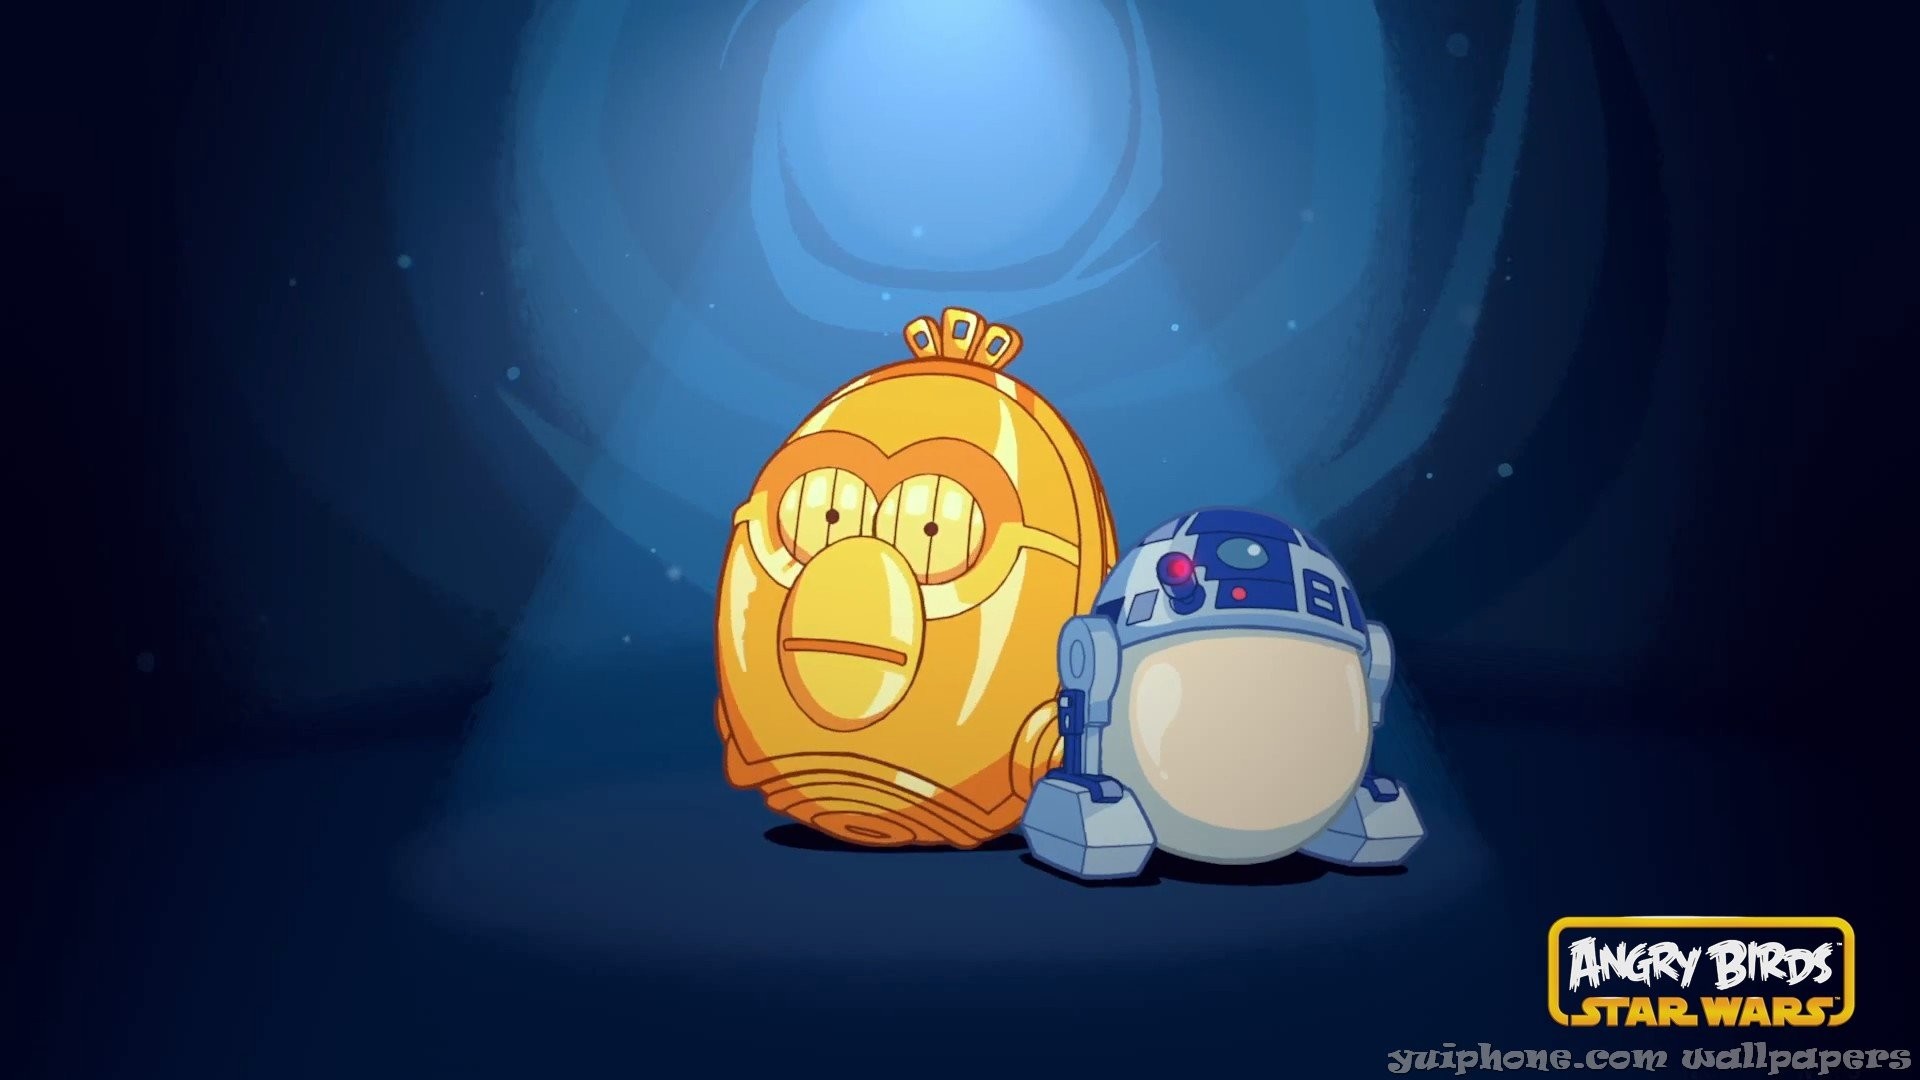 Angry Birds Star Wars R2D2.